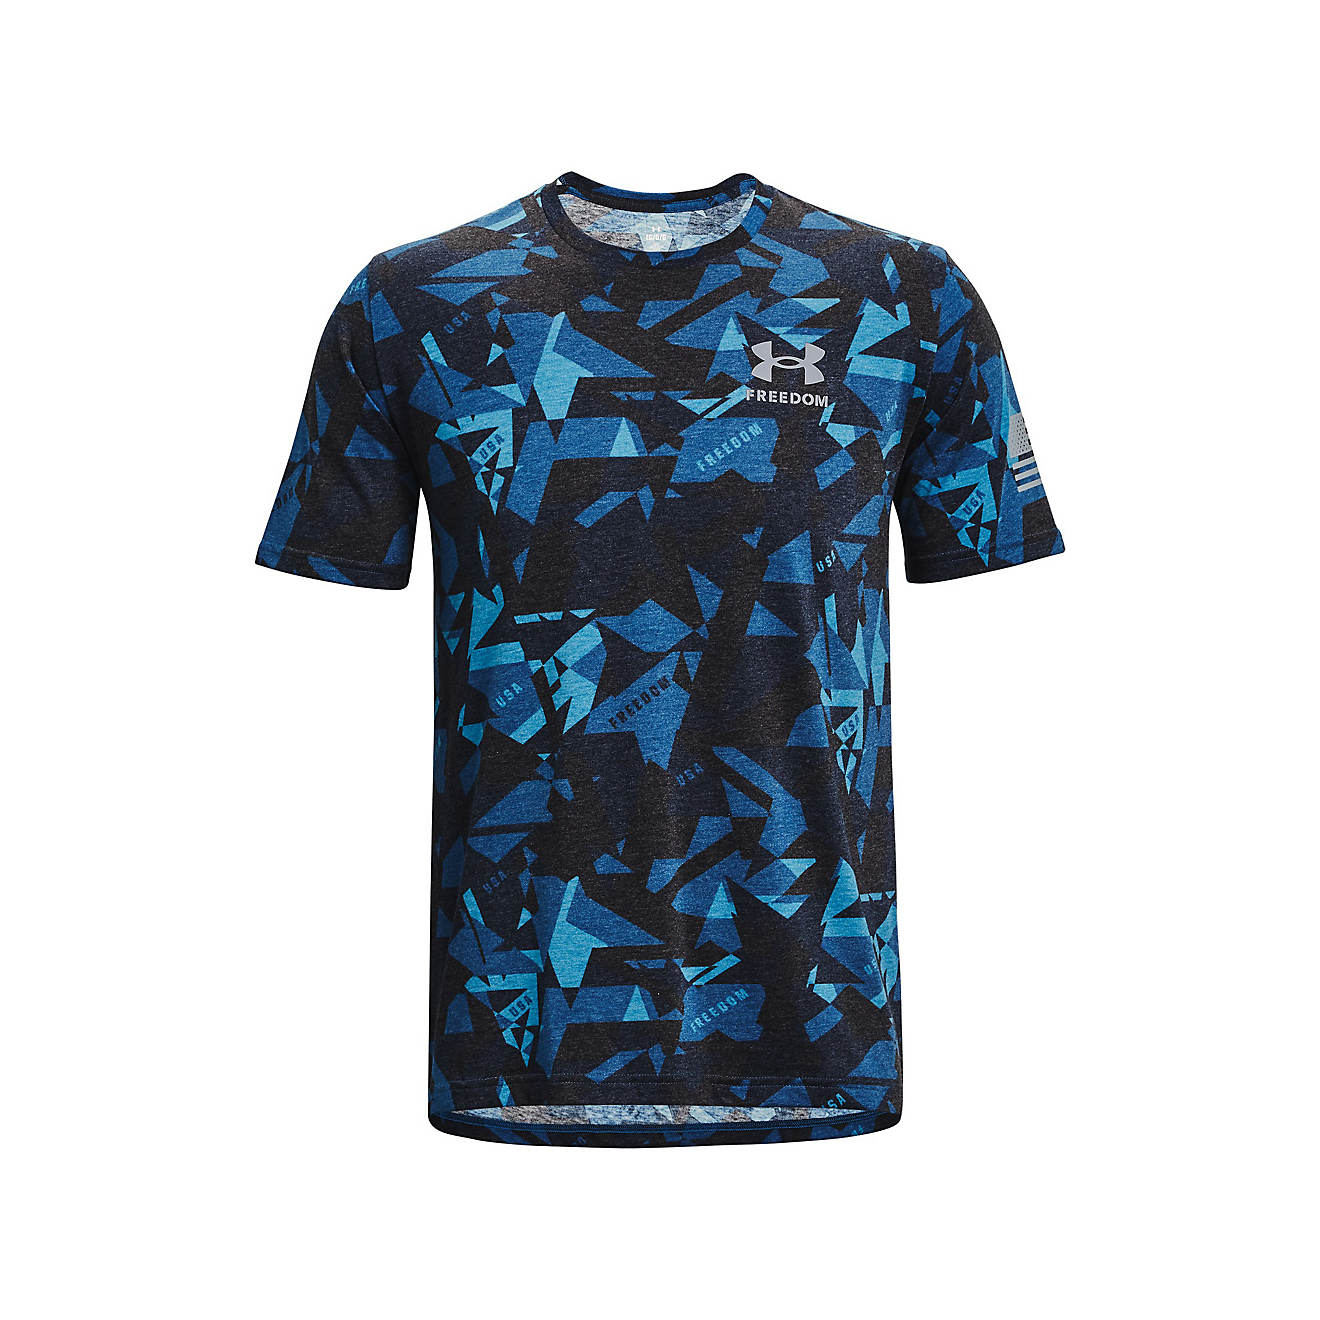 Under Armour Men's Freedom Amp 1 Graphic Short Sleeve T-shirt | Academy